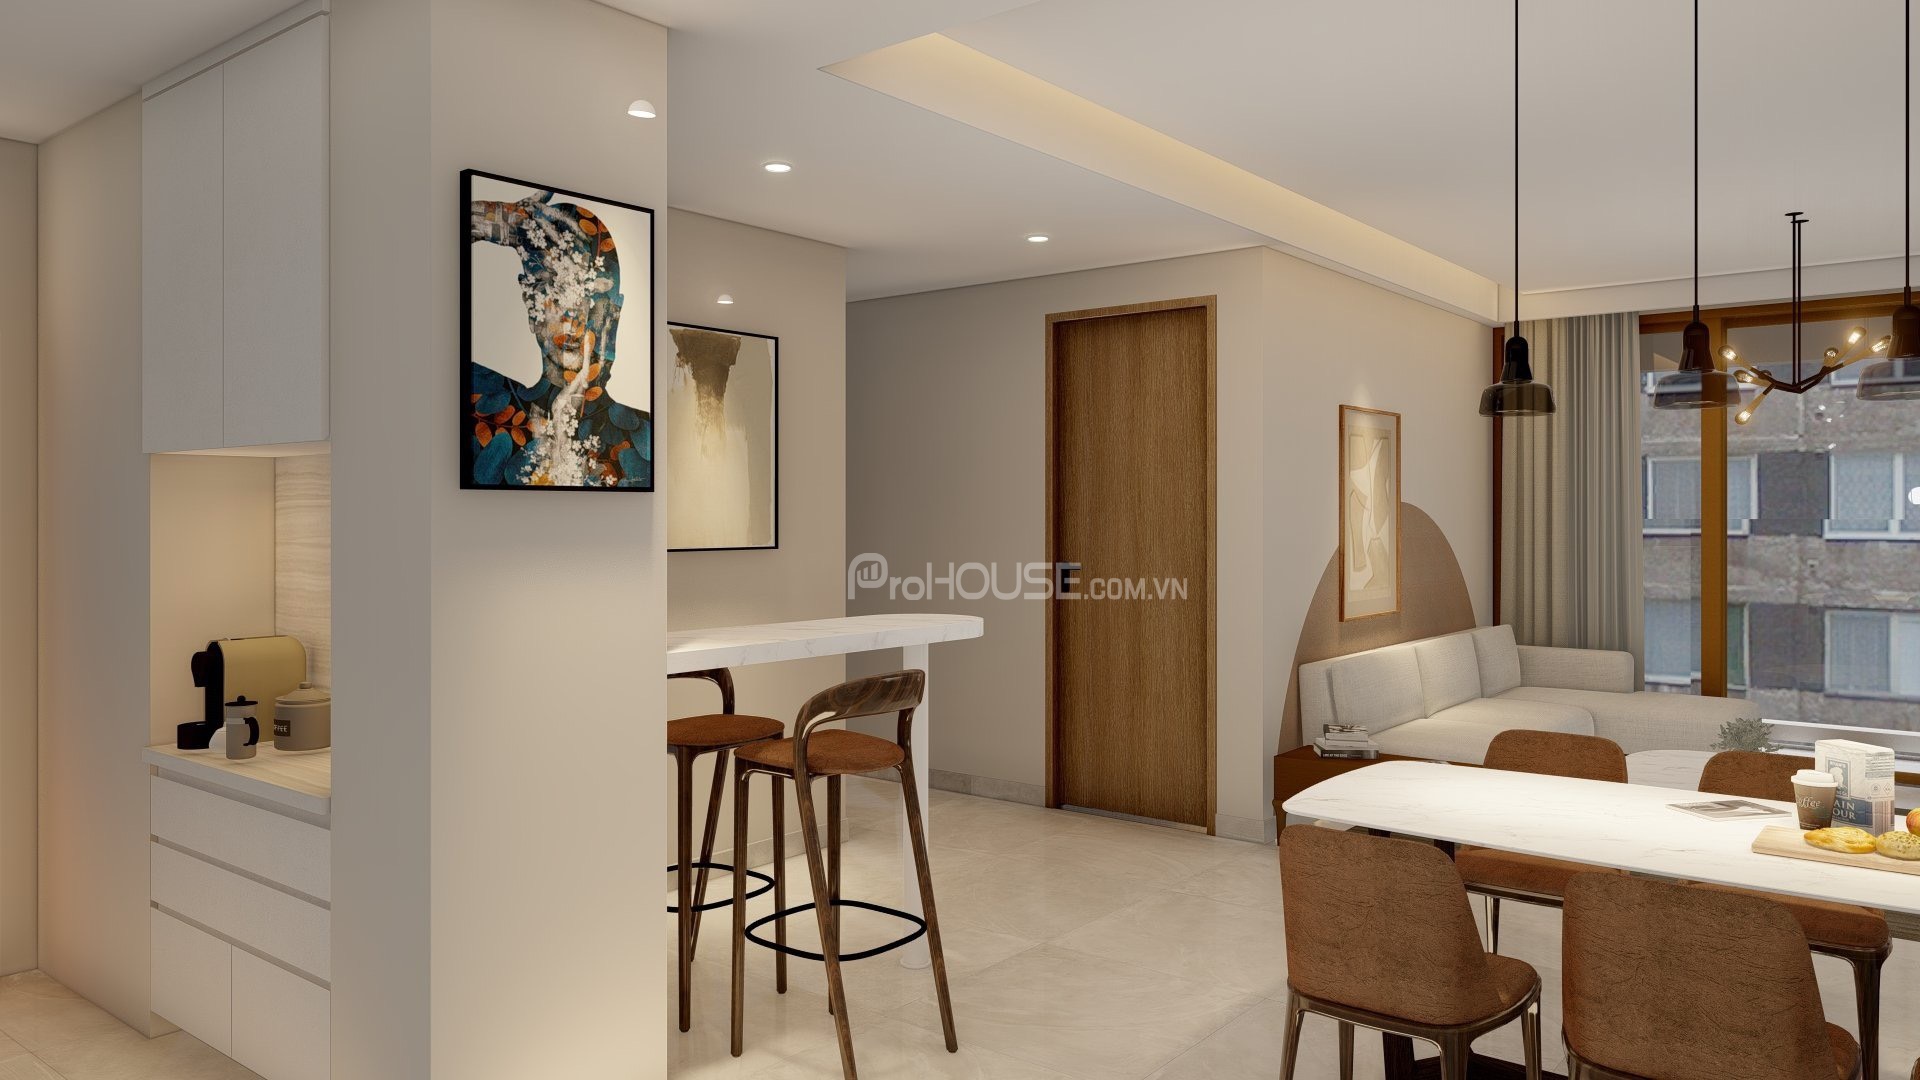 Beautiful 2 bedroom apartment for rent in Midtown Phu My Hung with full furniture